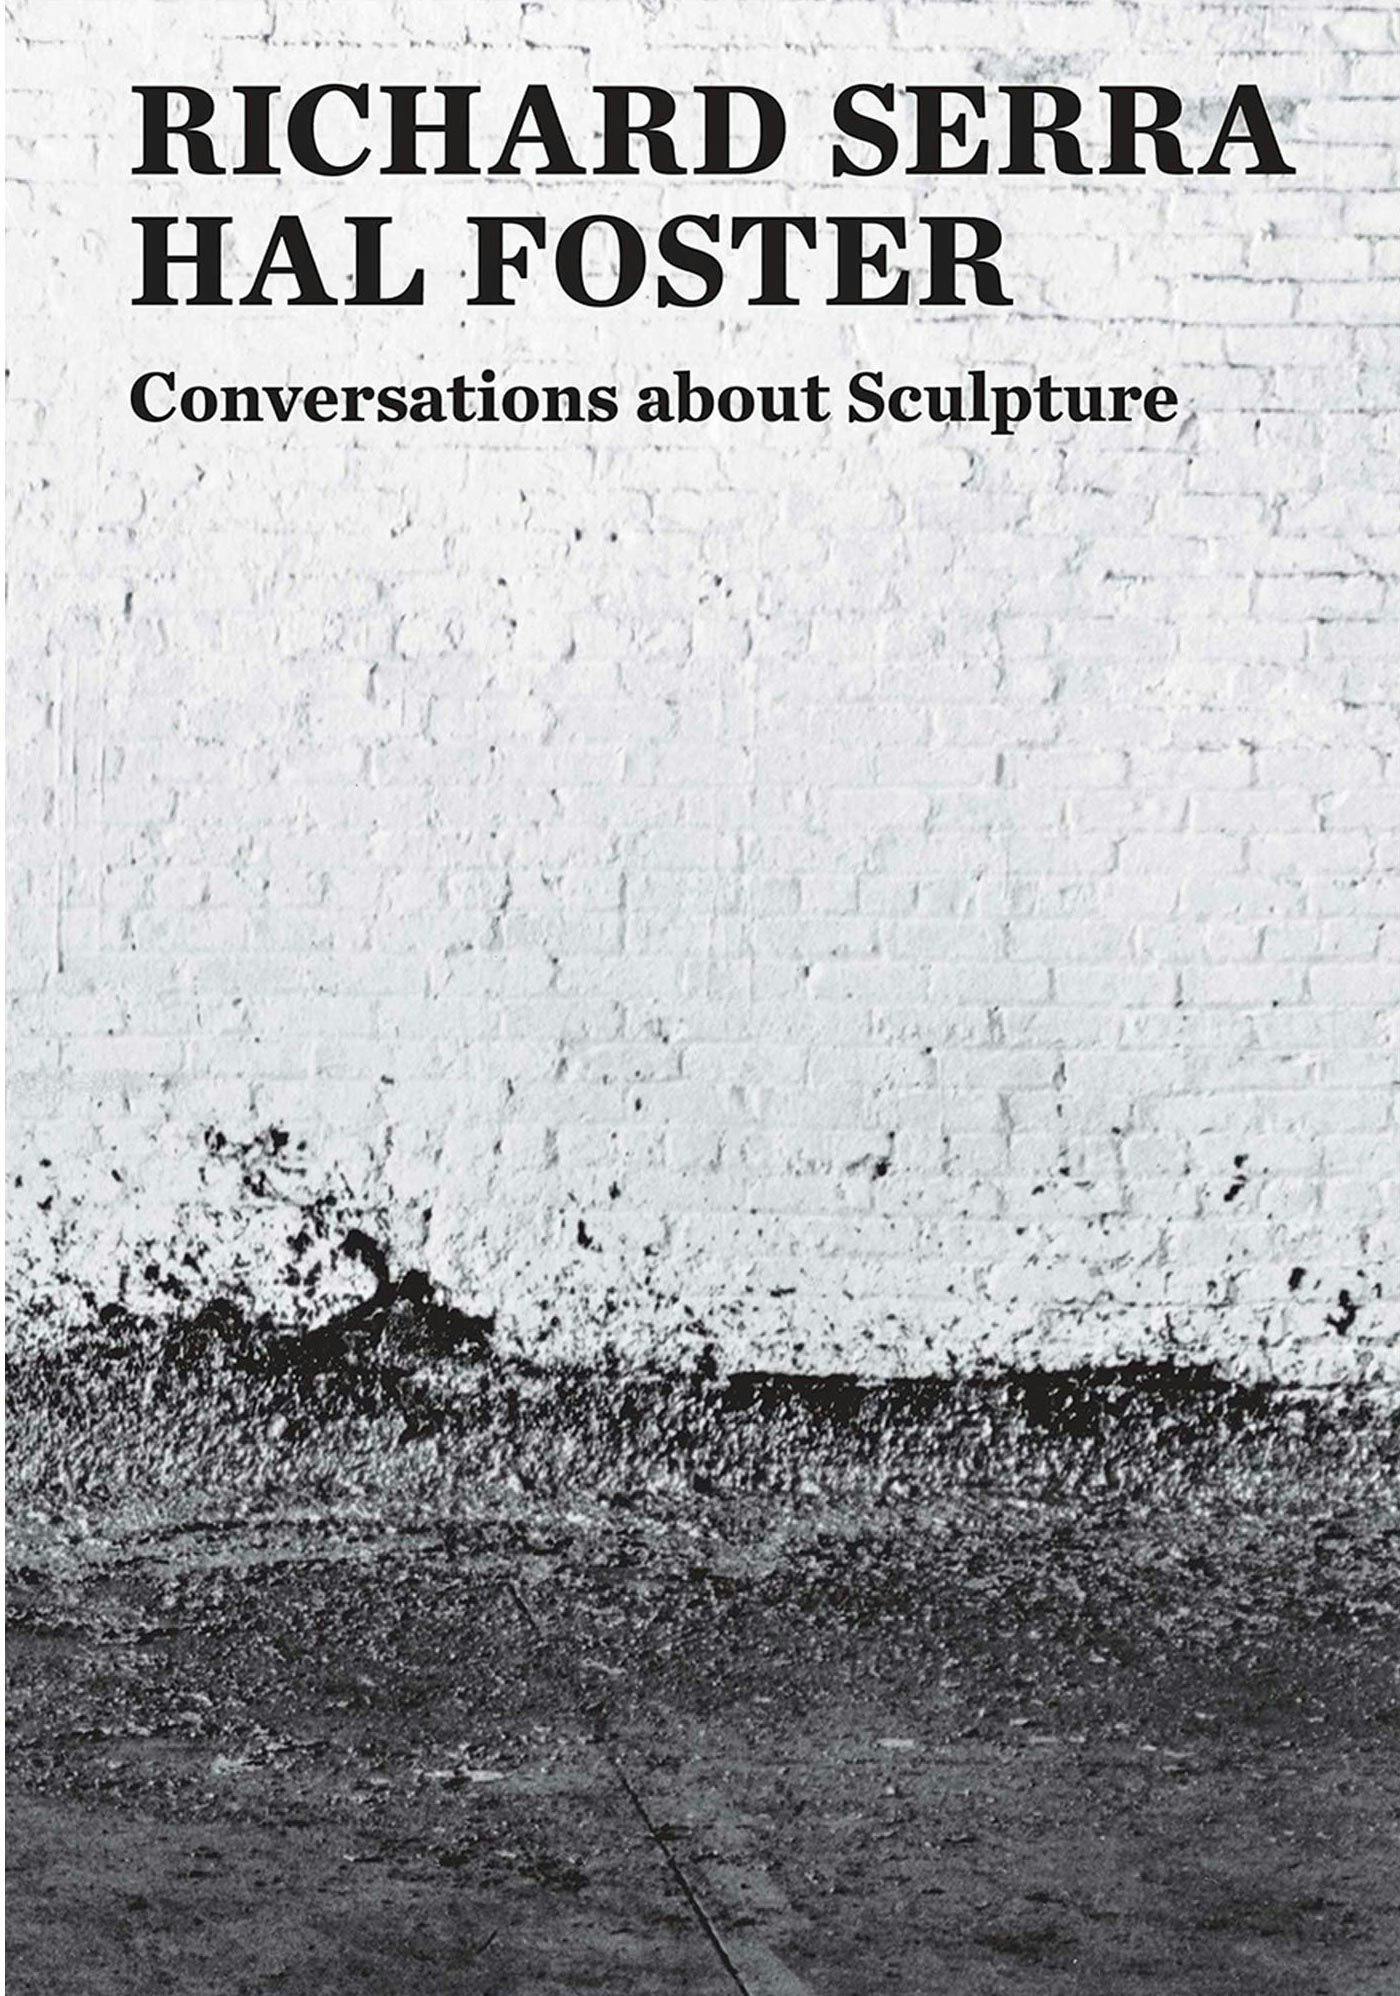 The cover of a book, titled Richard Serra: Conversations about Sculpture.